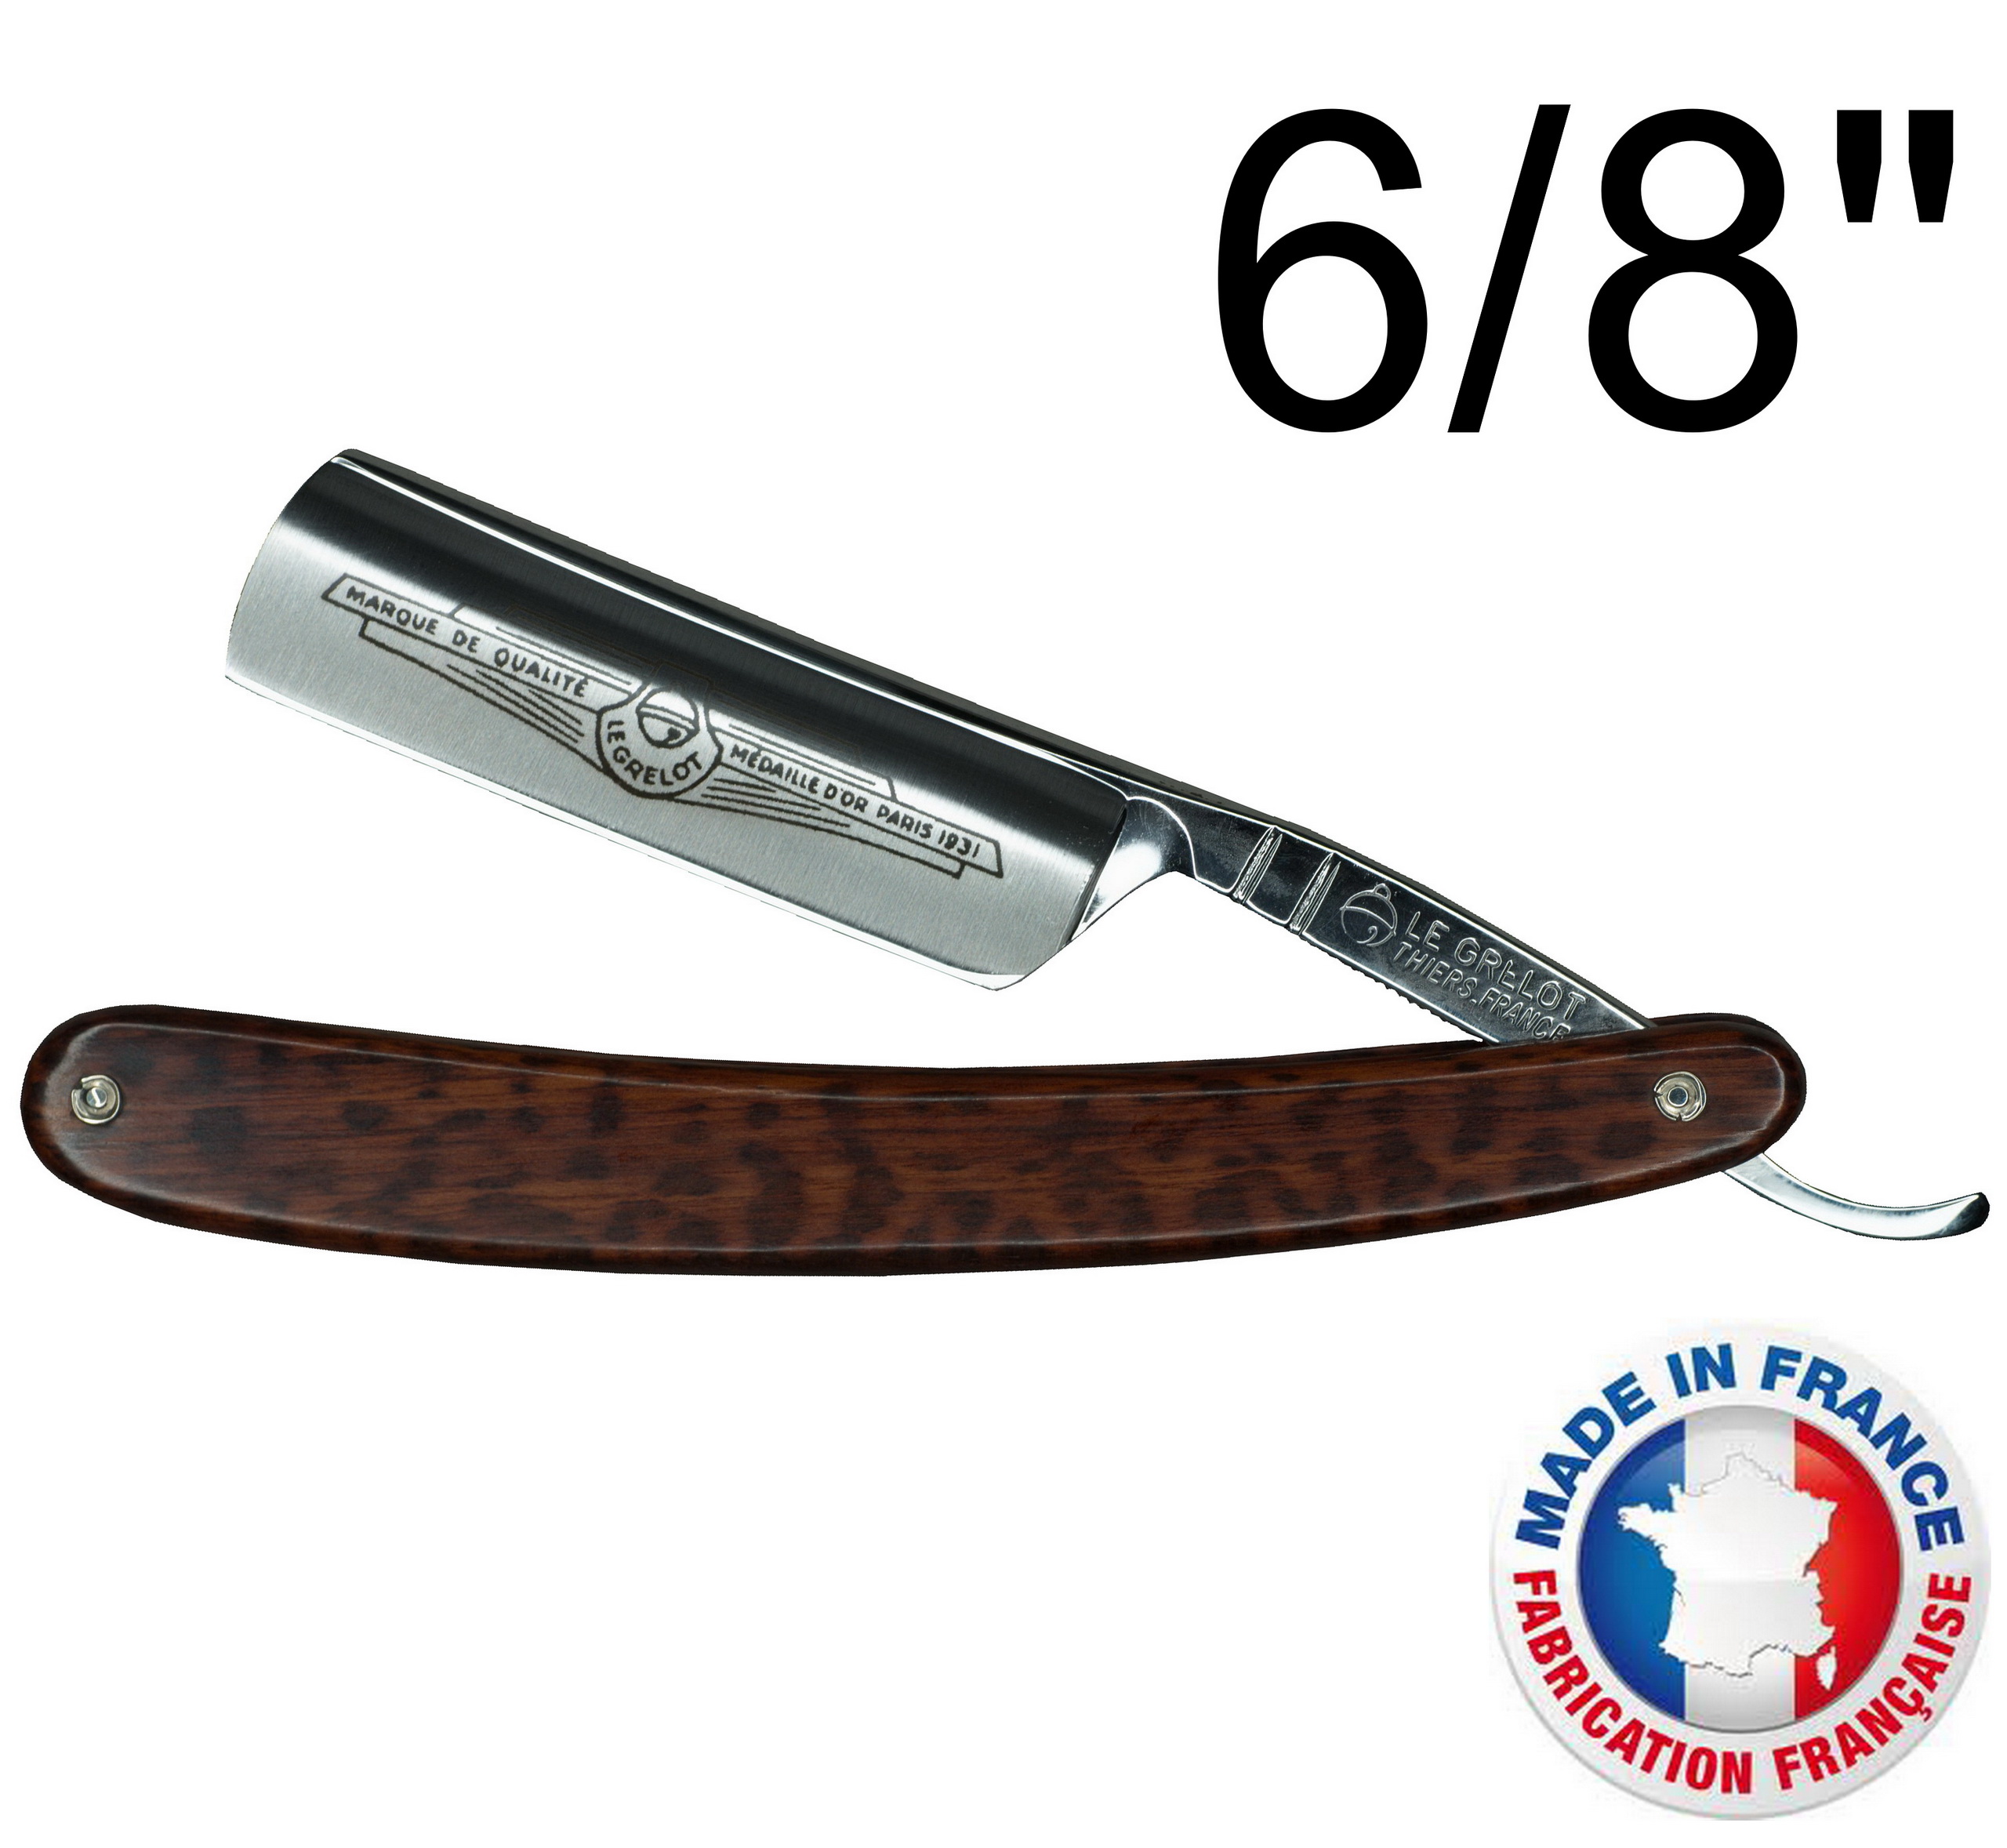 Thiers Issard Ground The Handle – | | Steel Straight Shave Grelot 6/8 in | Point Full Round Carbon Made | Snakewood | France Superior Le Razor French | Size 275 Hollow